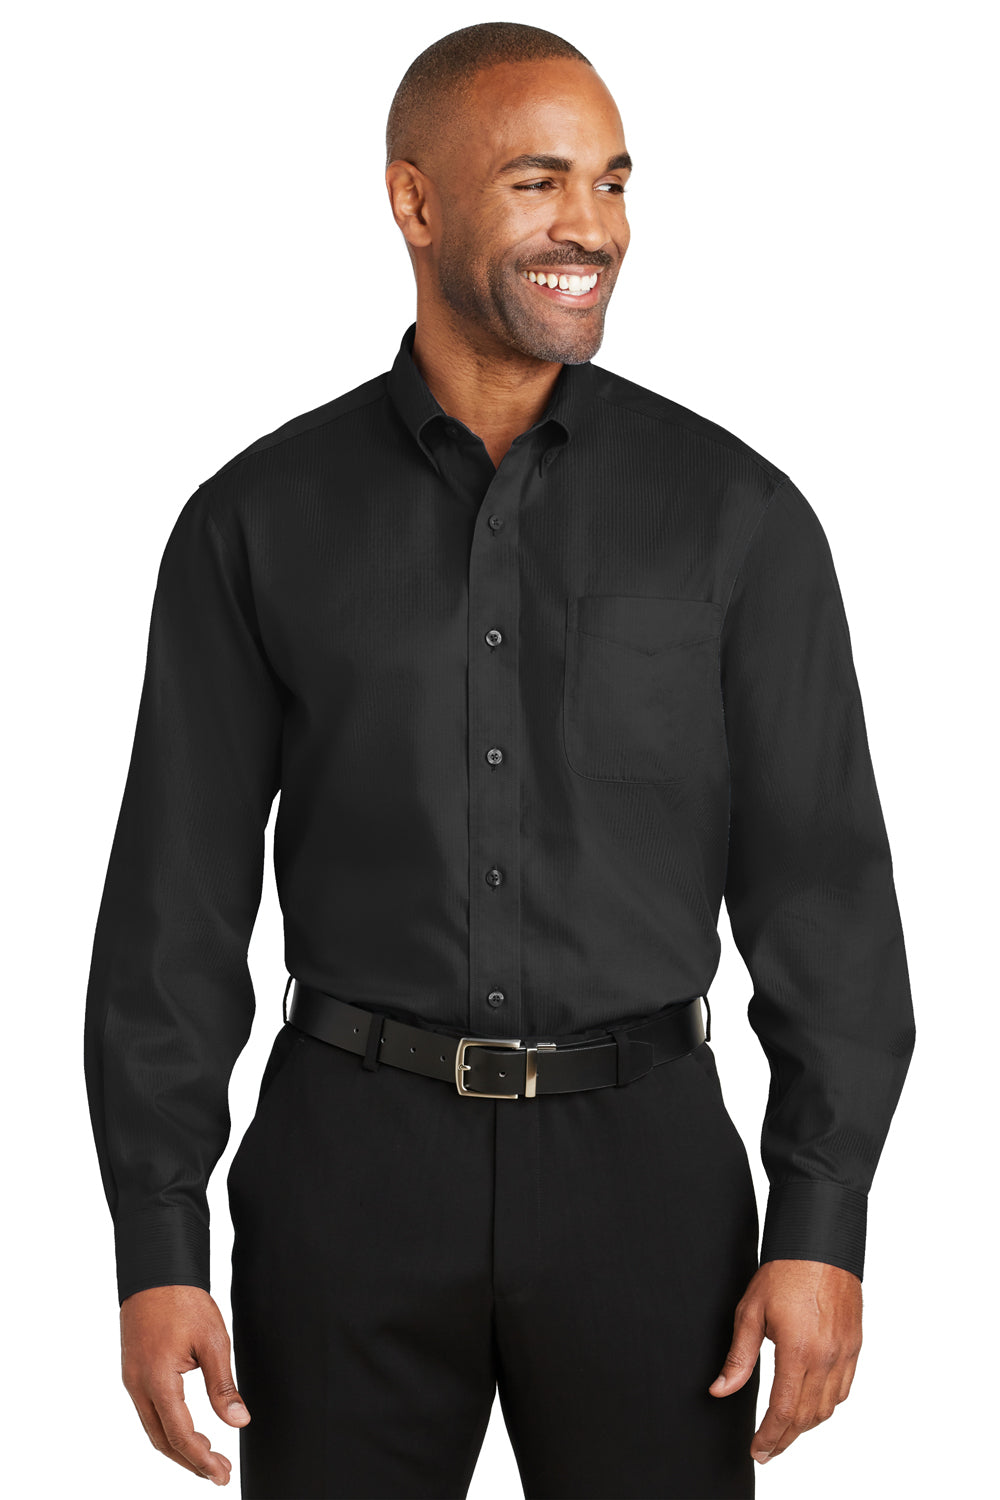 Red House RH60 Mens Wrinkle Resistant Long Sleeve Button Down Shirt w/ Pocket Black Front